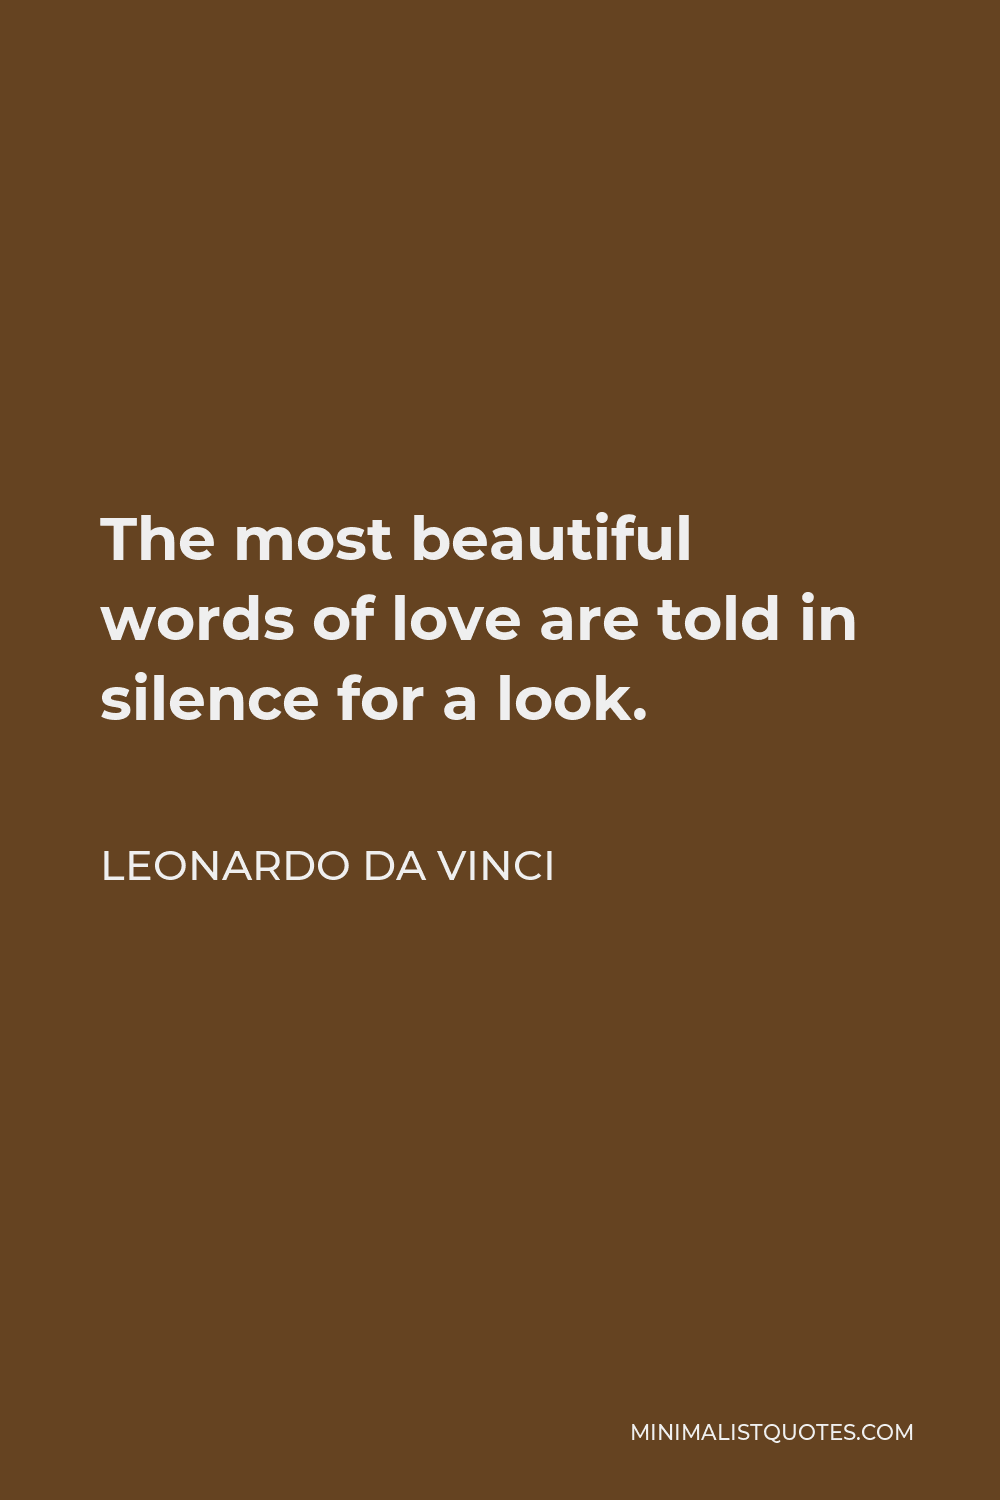 Leonardo da Vinci Quote - The most beautiful words of love are told in silence for a look.